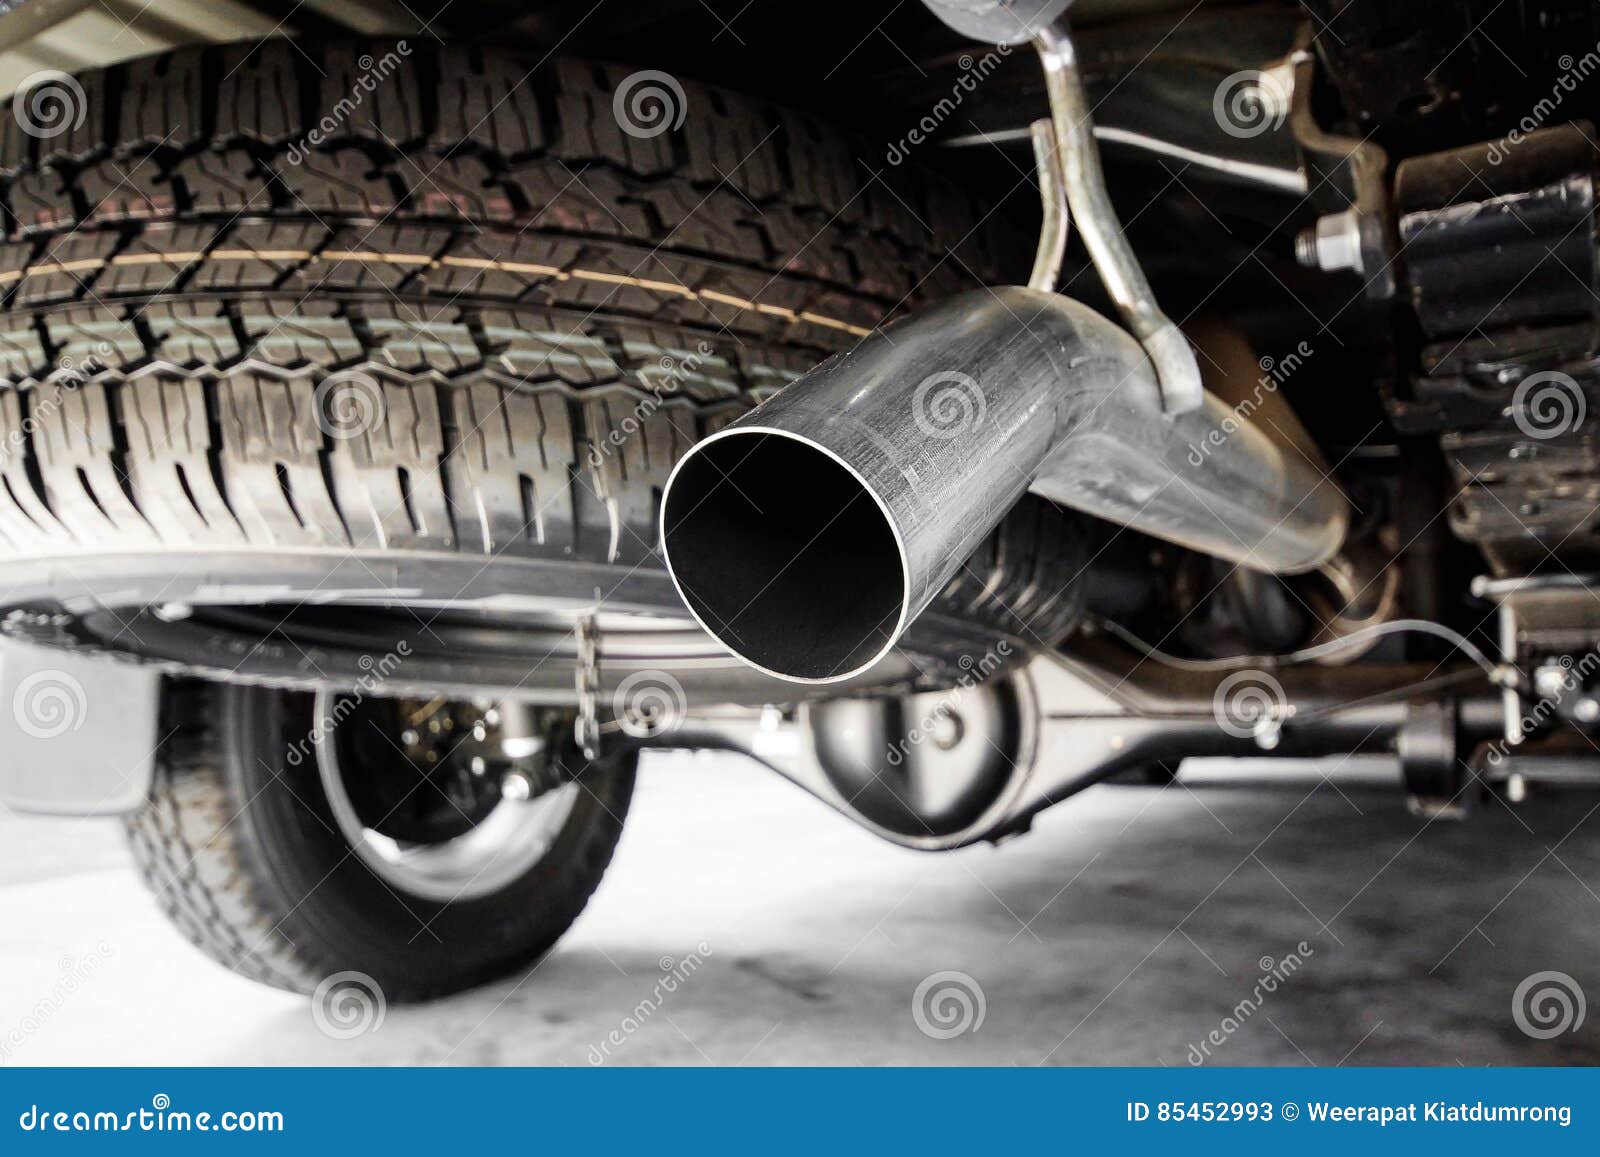 Exhaust pipe stock image. Image of truck, pipe, transport - 85452993